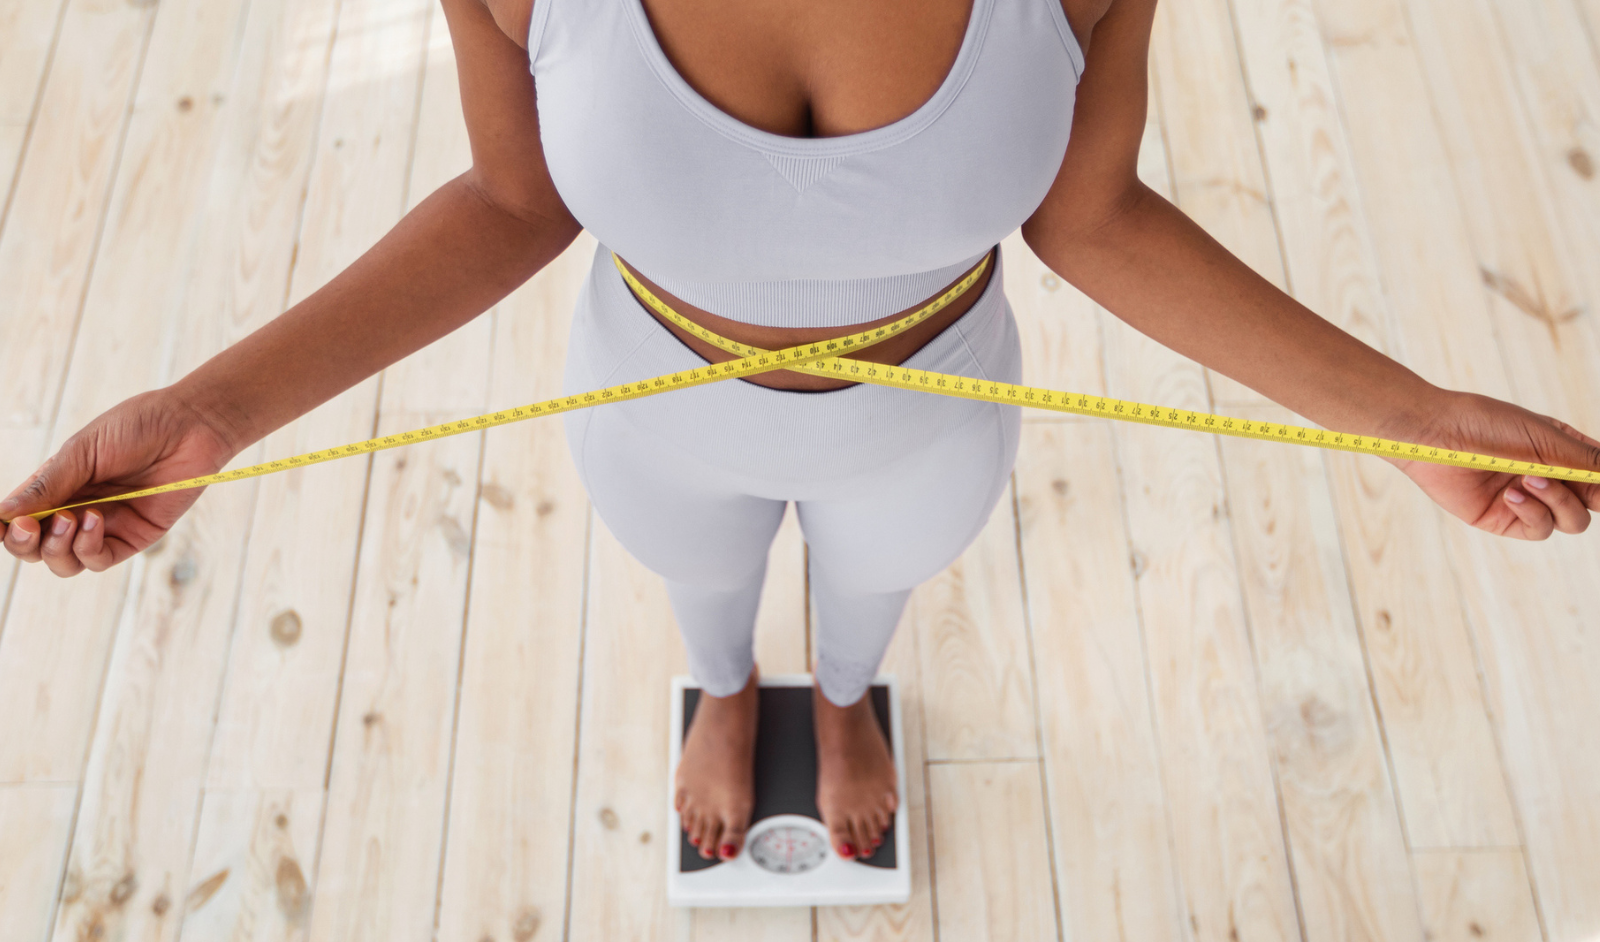 Effective Strategies for Breaking Through Weight Loss Plateaus